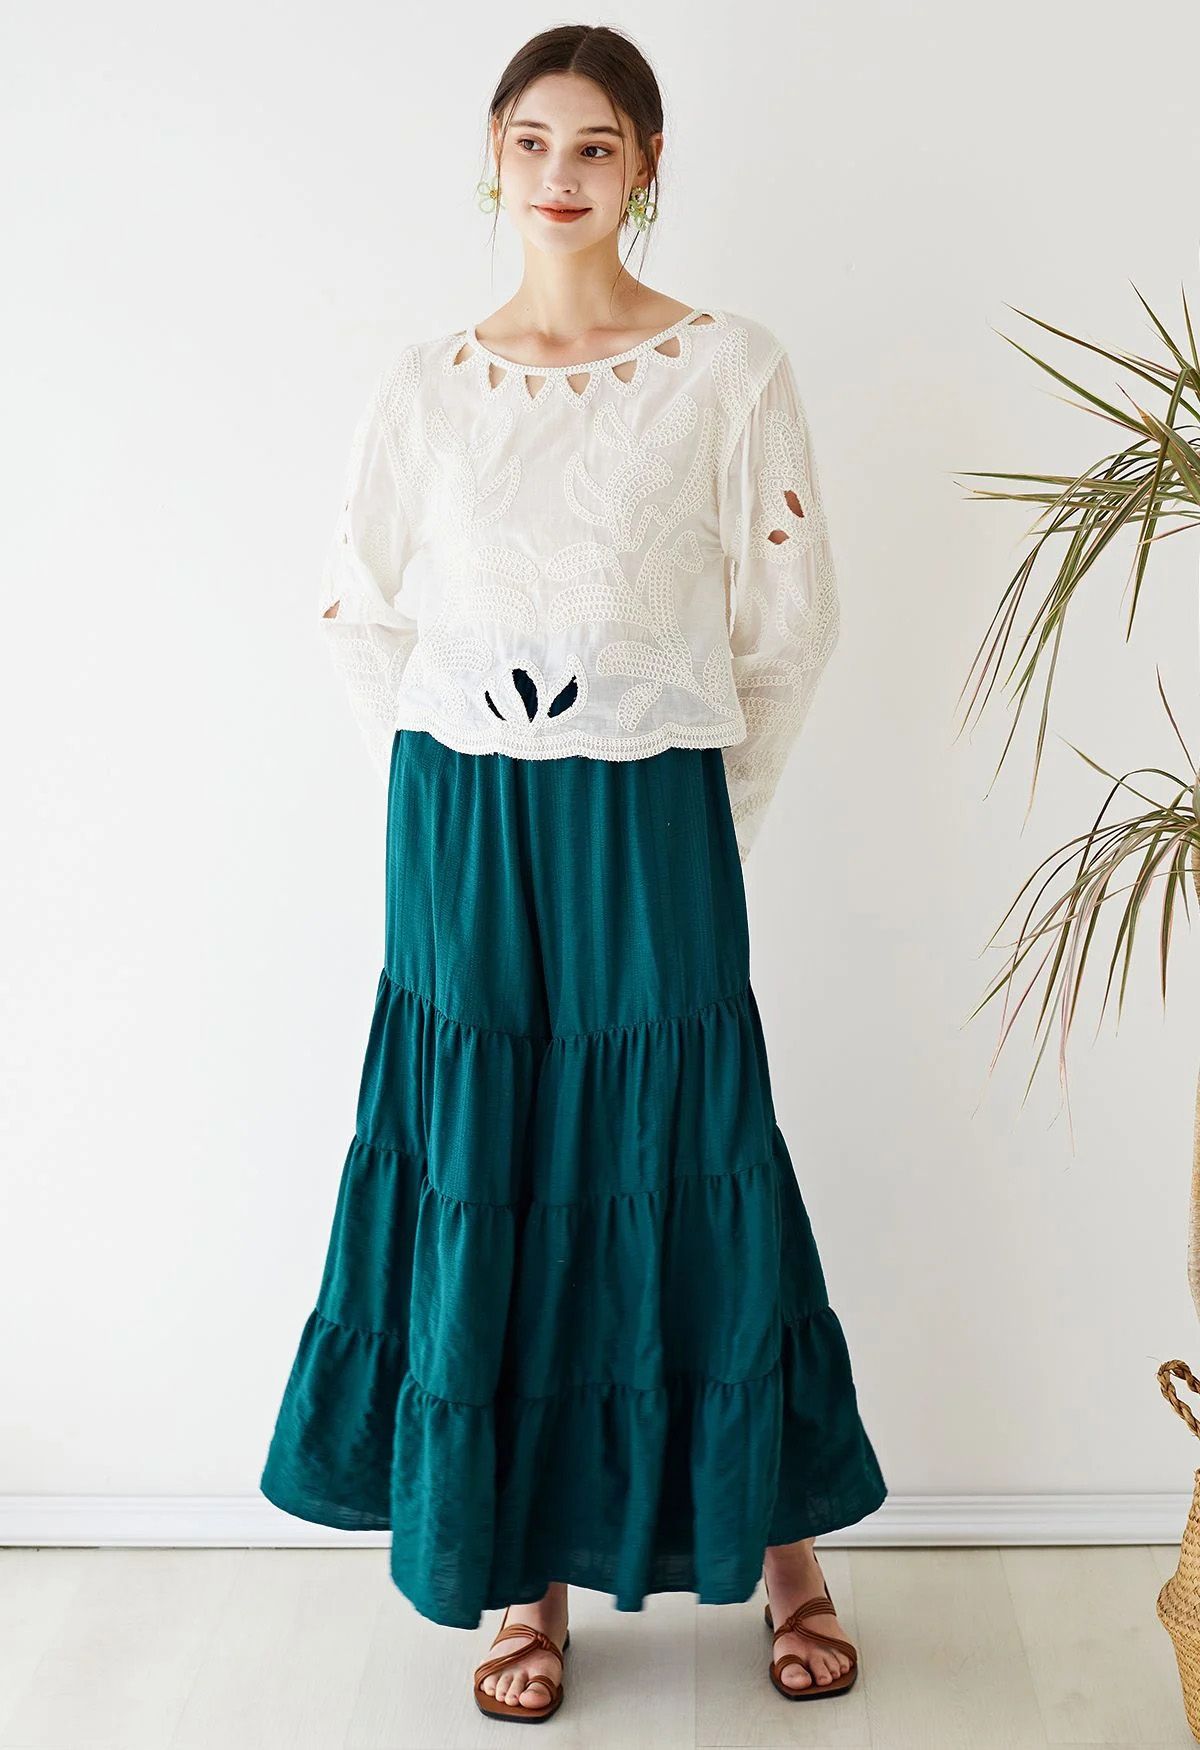 Sunny Days Wide-Leg Pants in Emerald